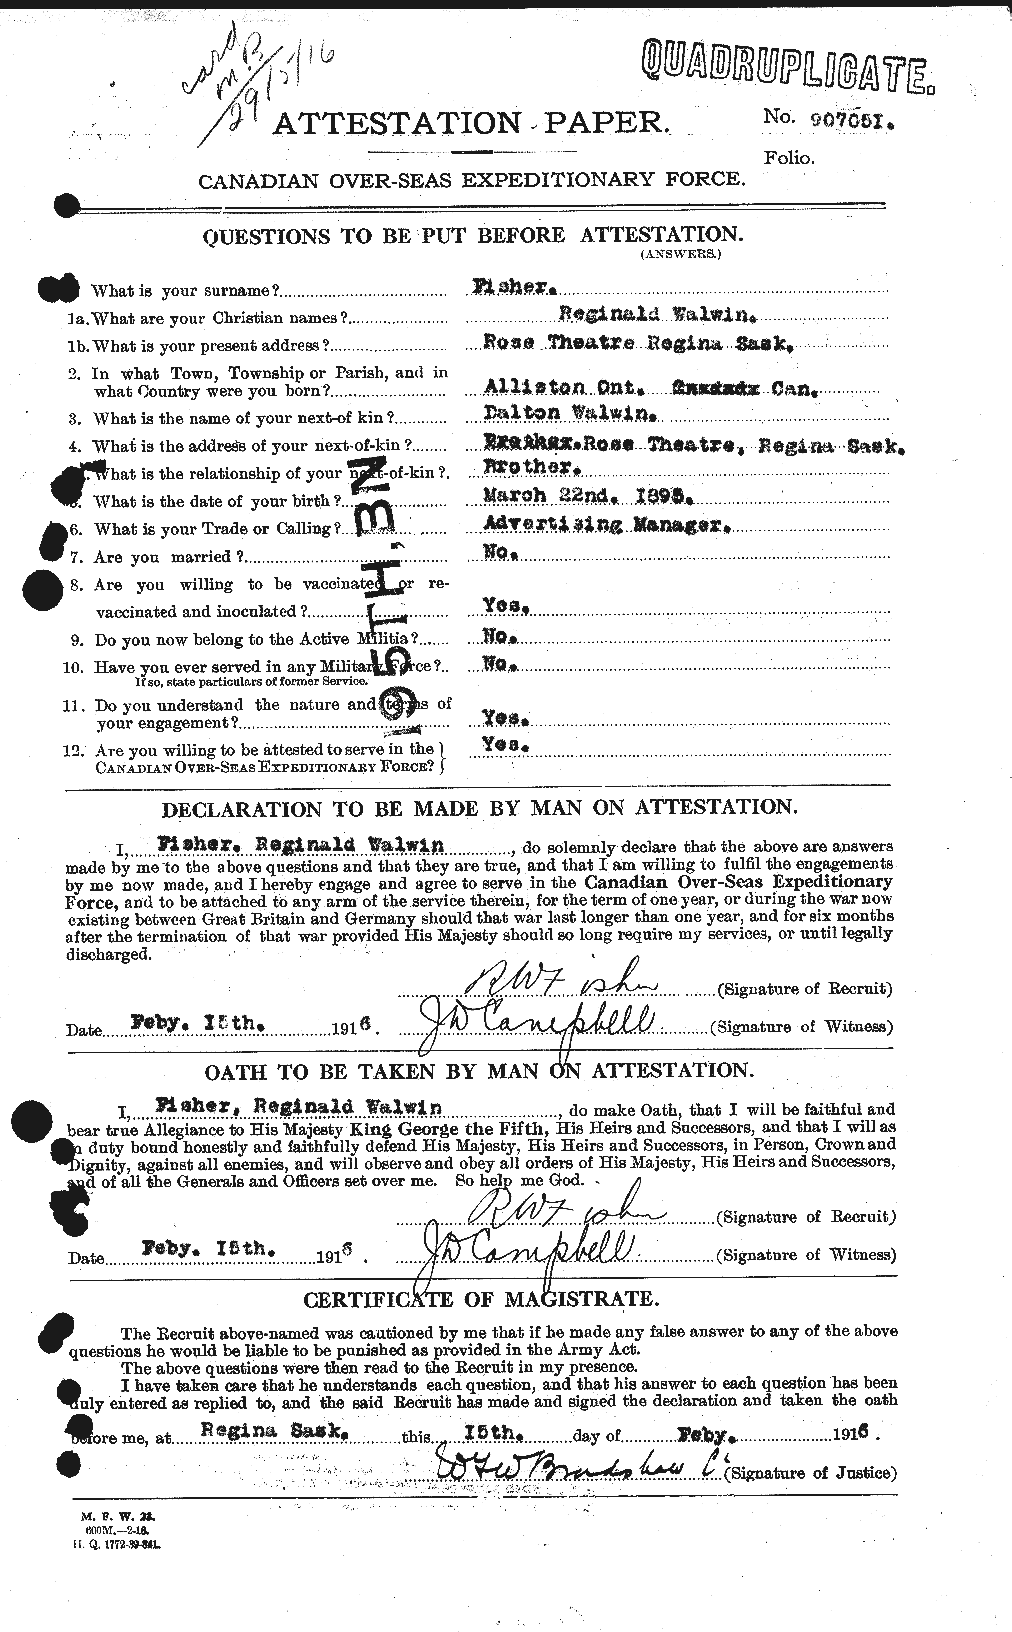 Personnel Records of the First World War - CEF 327238a